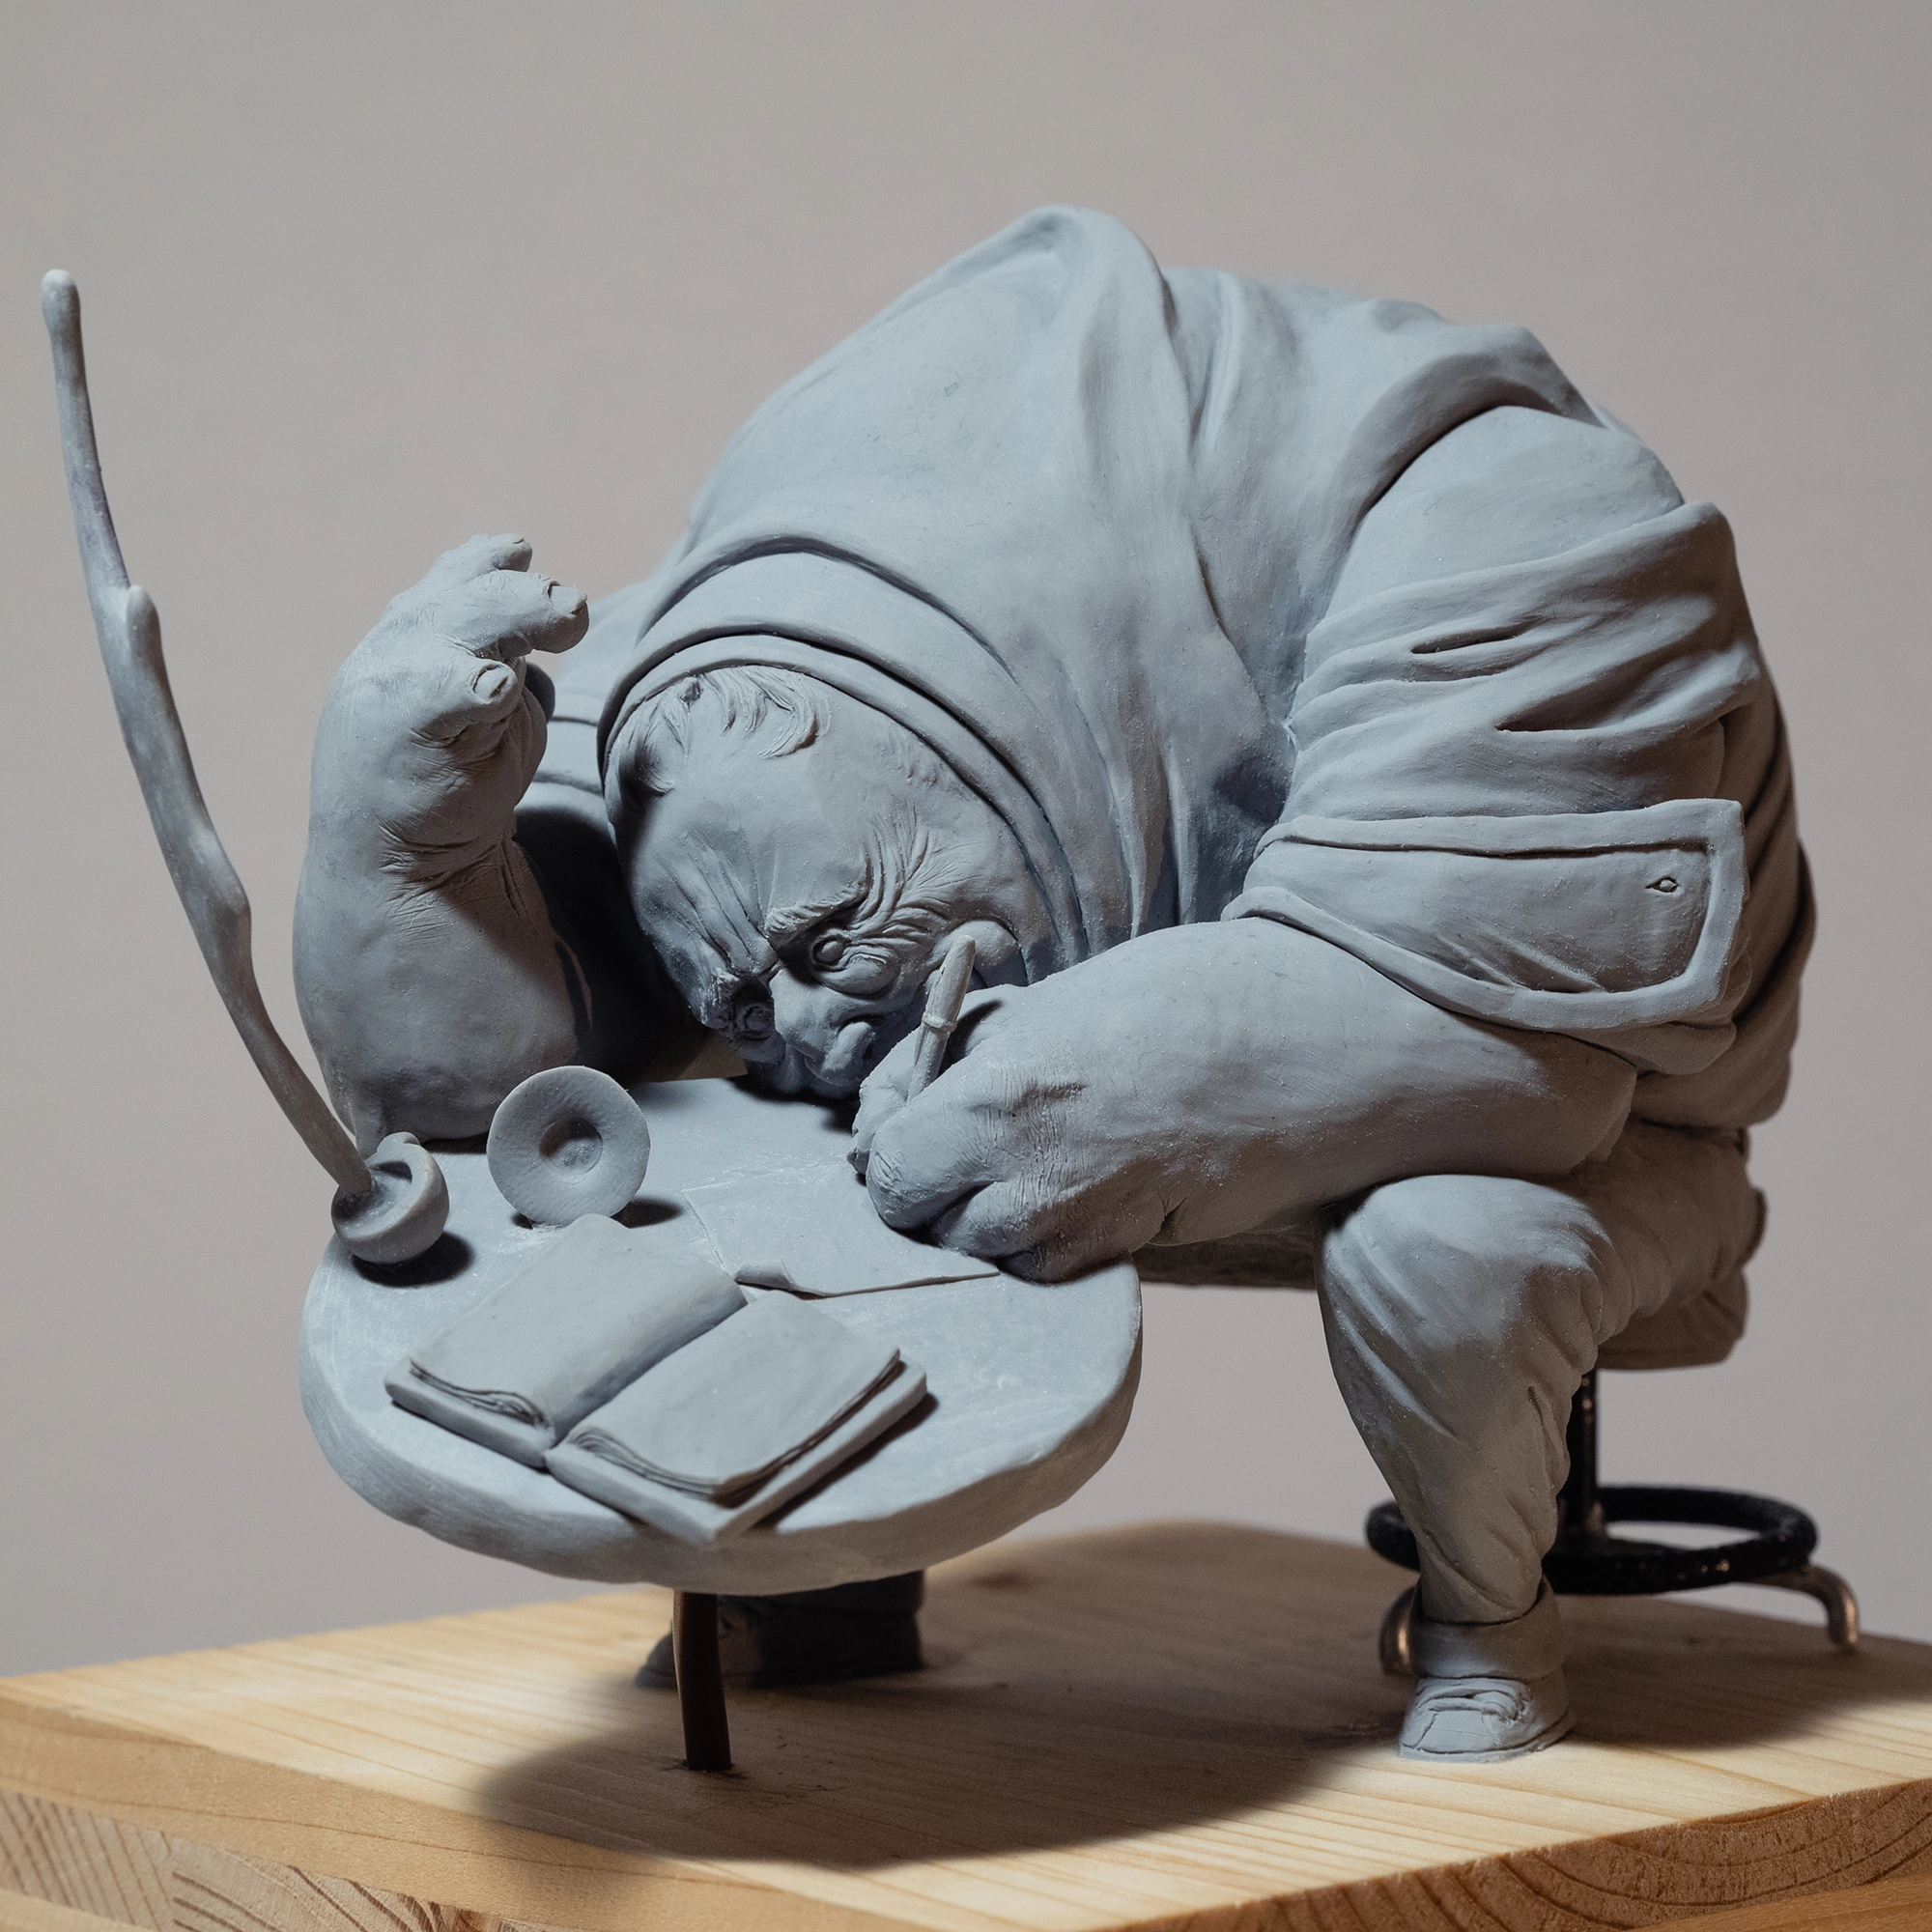 Sculpture by the artist Teddy Ros "café-créa" 2022, sculpted in polymer clay, representing a large character sitting on a stool writing in his little notebook, while his cup of coffee is shattered, Teddy Ros artist contemporary art series